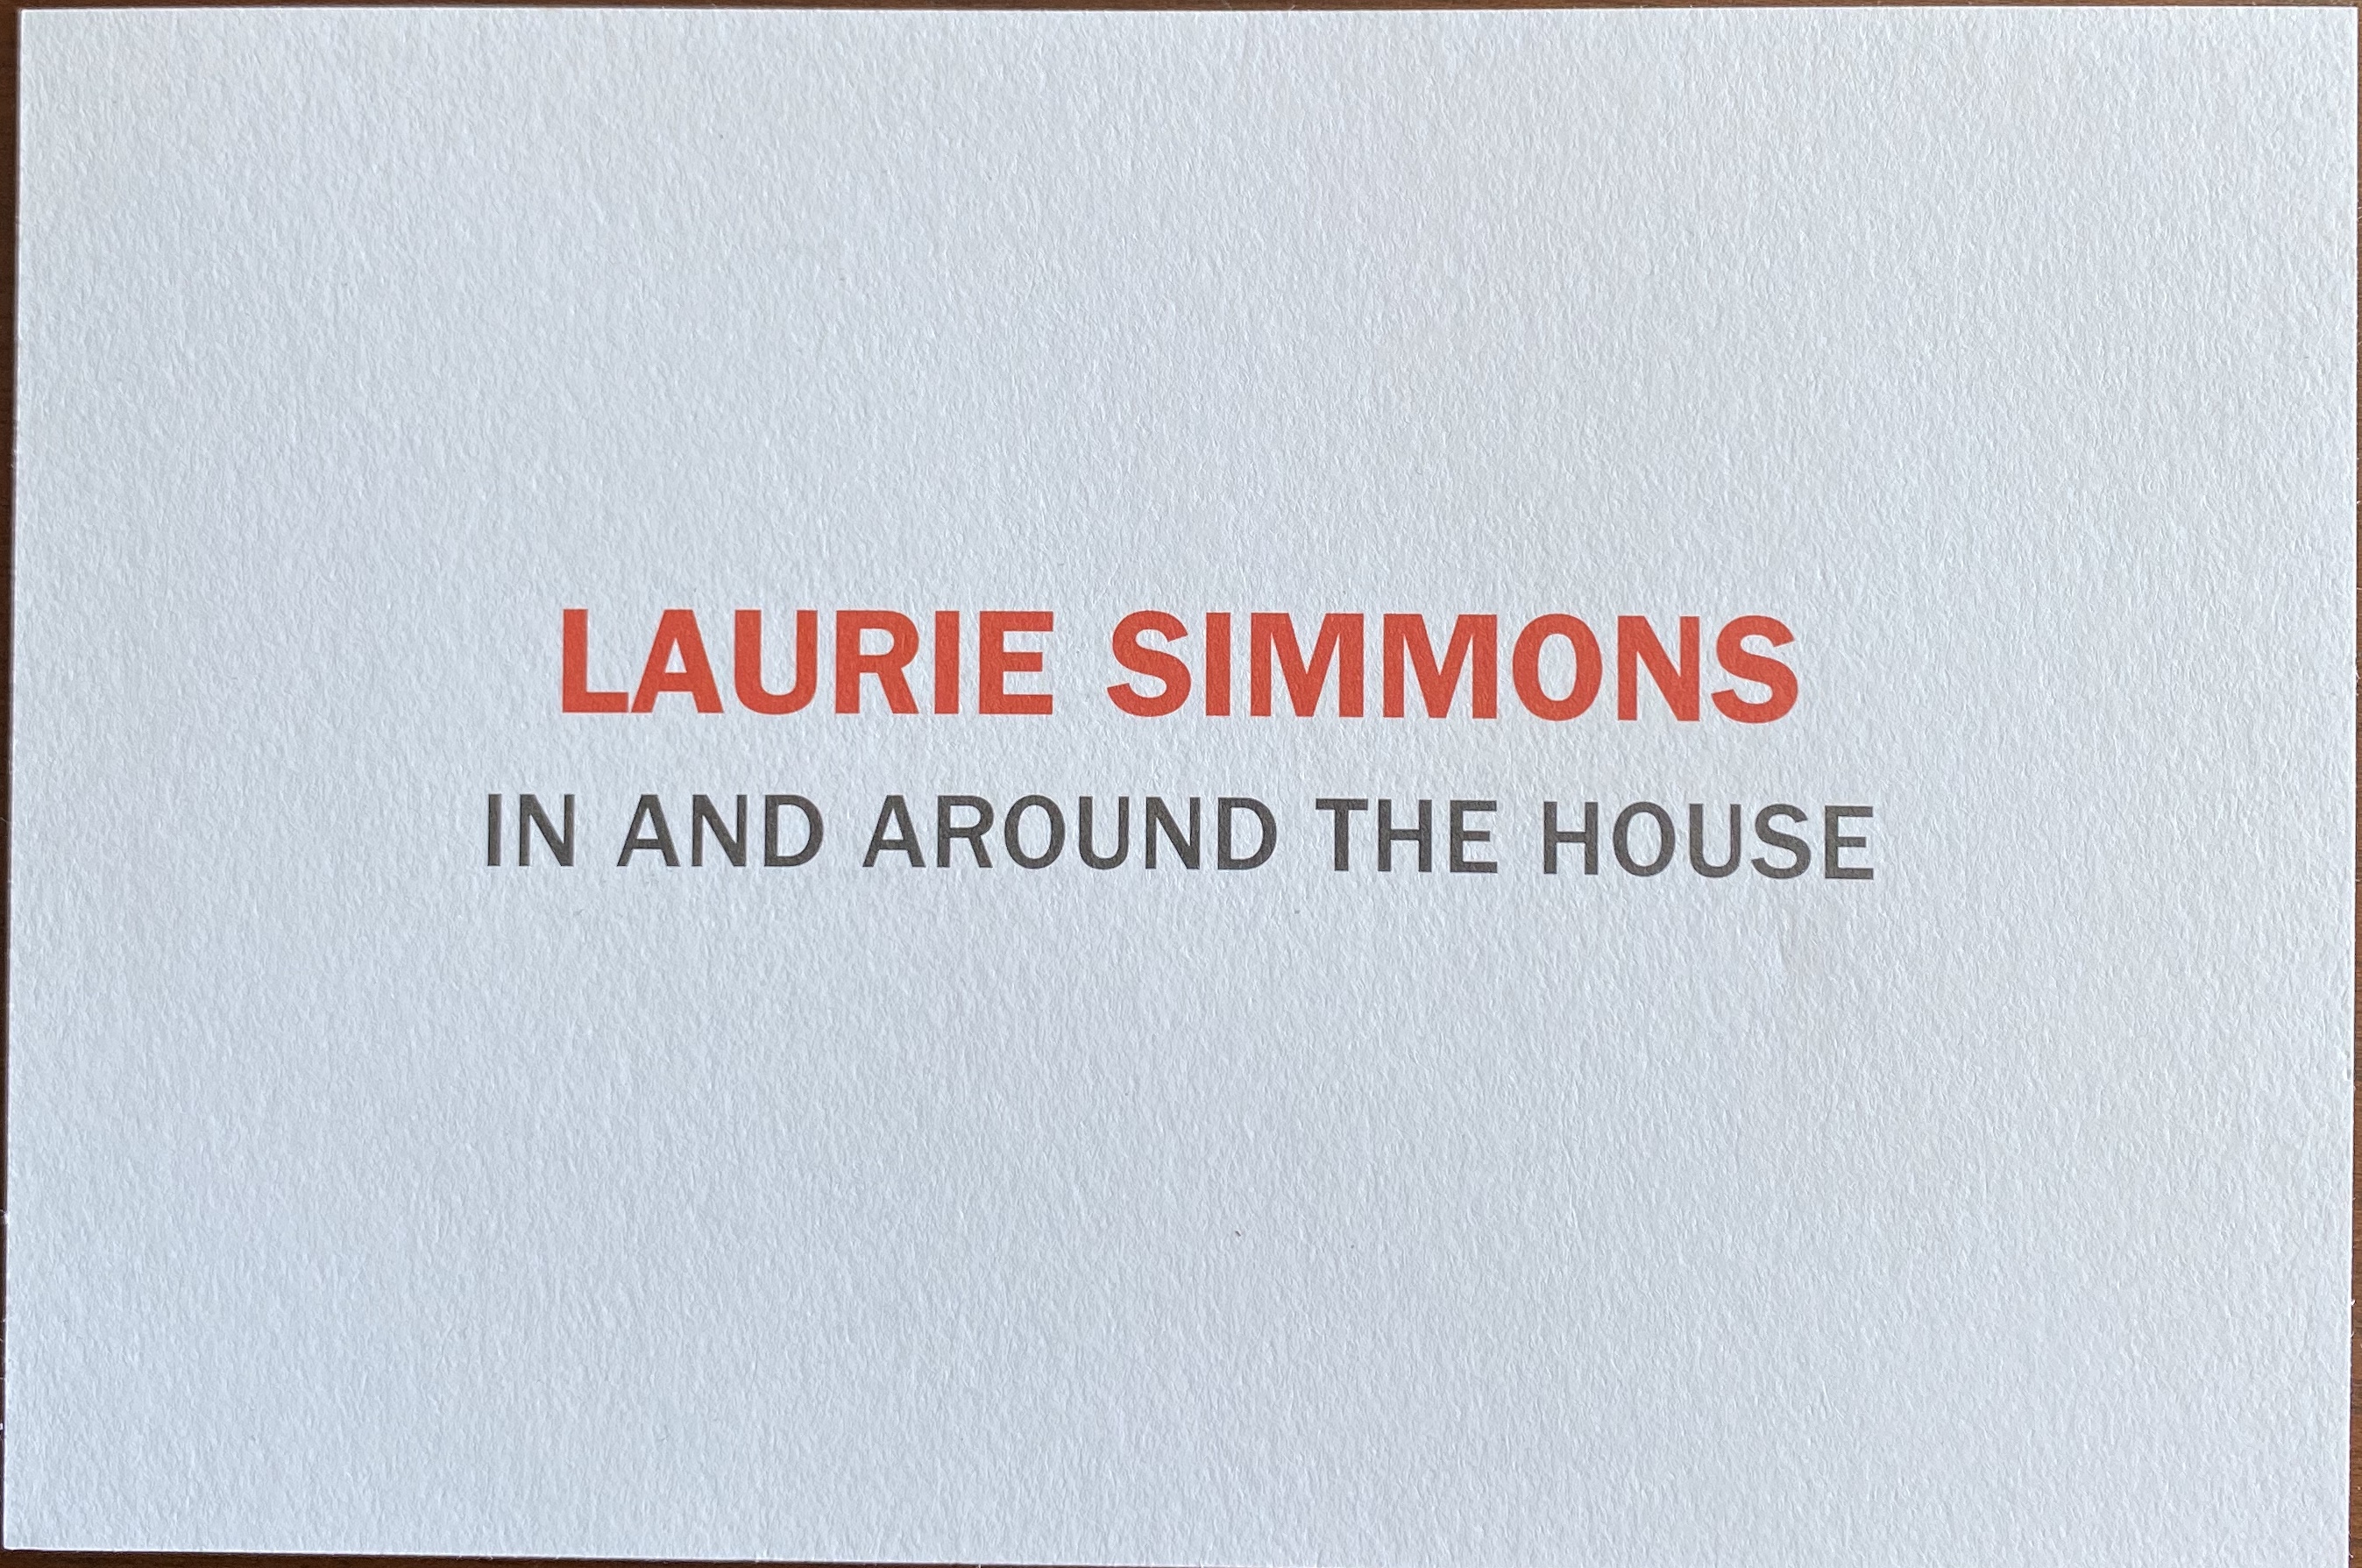 Laurie Simmons. In and around the house. Photographs 1976-78. Erna Hecey  Gallery, Bruxelles/Brussel, 20.12.2008 – 14.2.2009